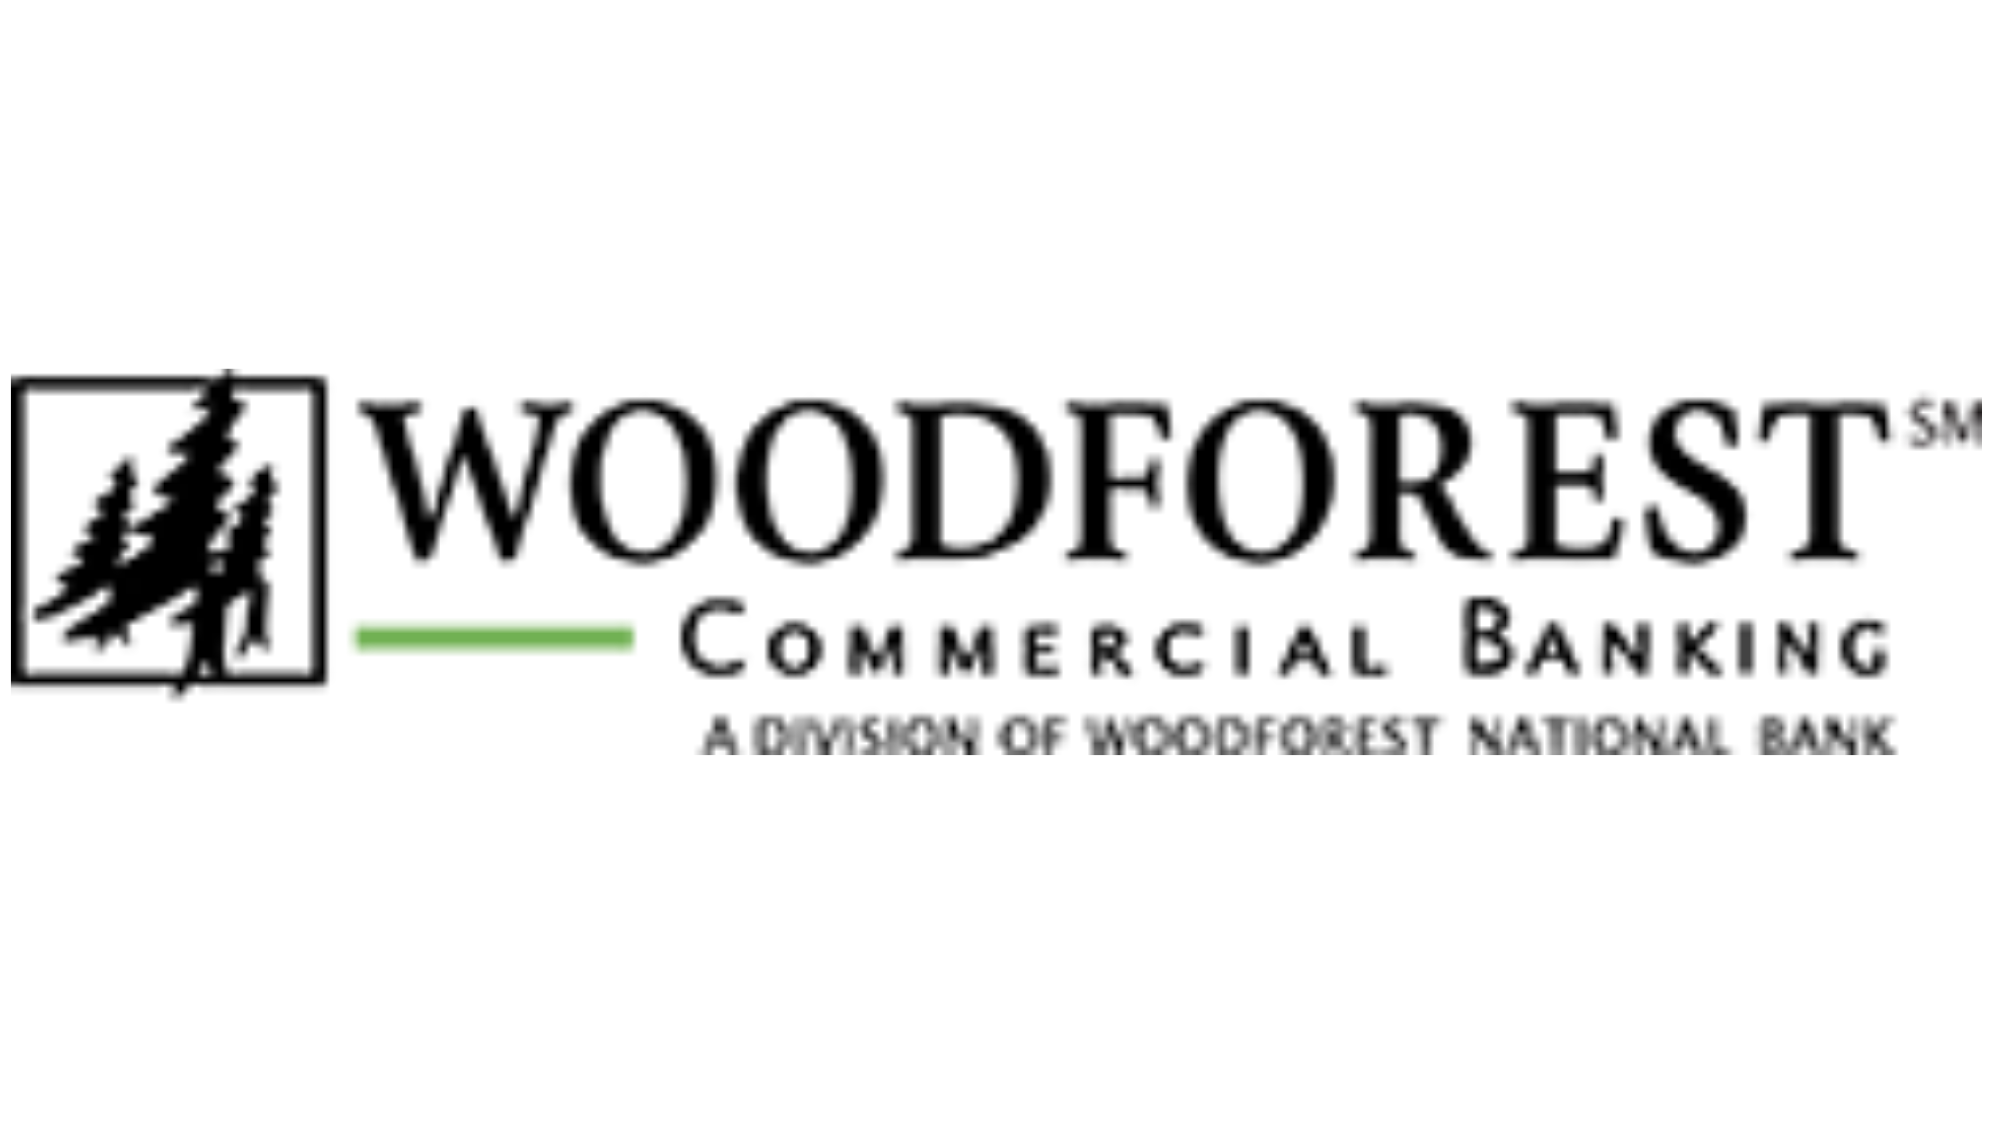 Woodforest Commercial Banking